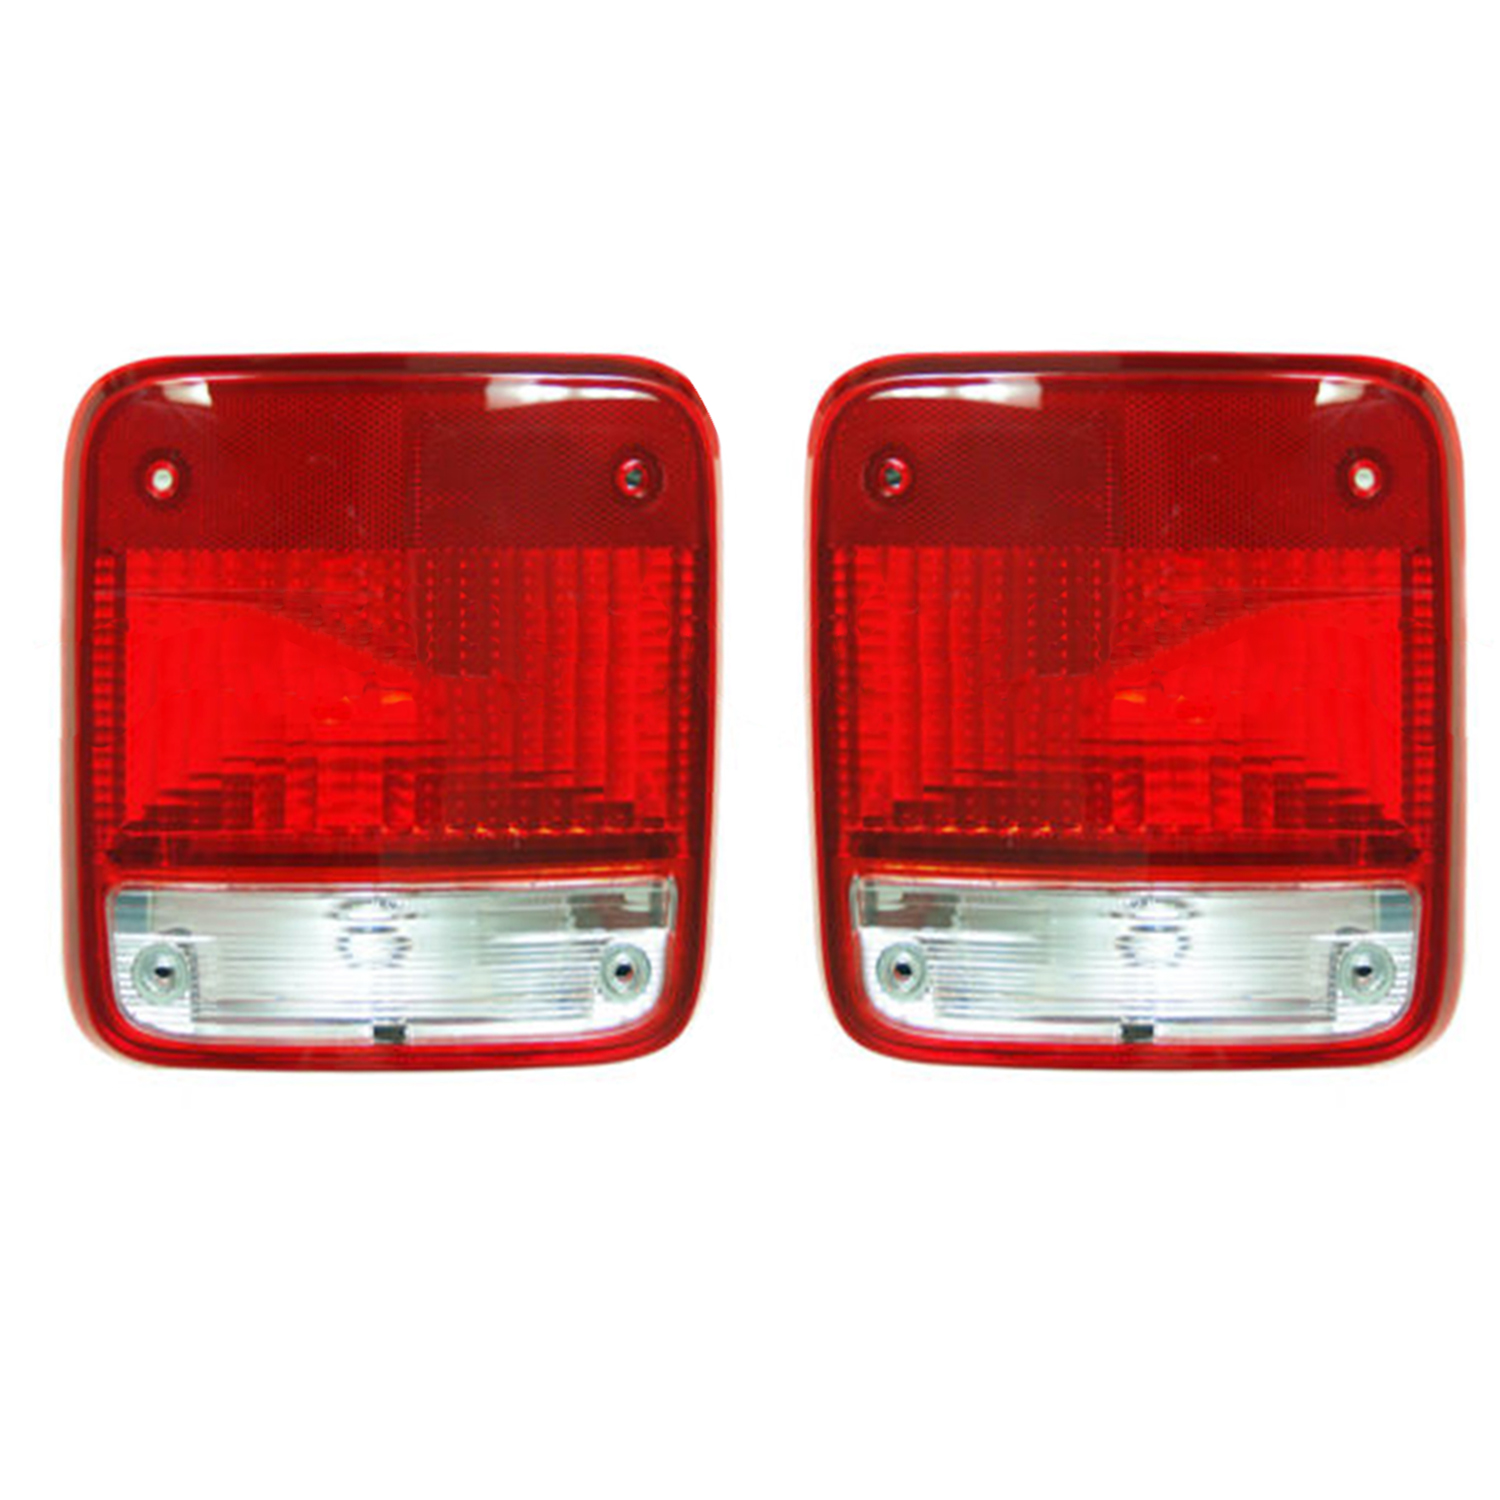 Rareelectrical NEW PAIR OF TAIL LIGHTS COMPATIBLE WITH CHEVROLET G30 1985-1996 G10 G20 1985-1995 GM2800101 GM2801101 5977496 5977495